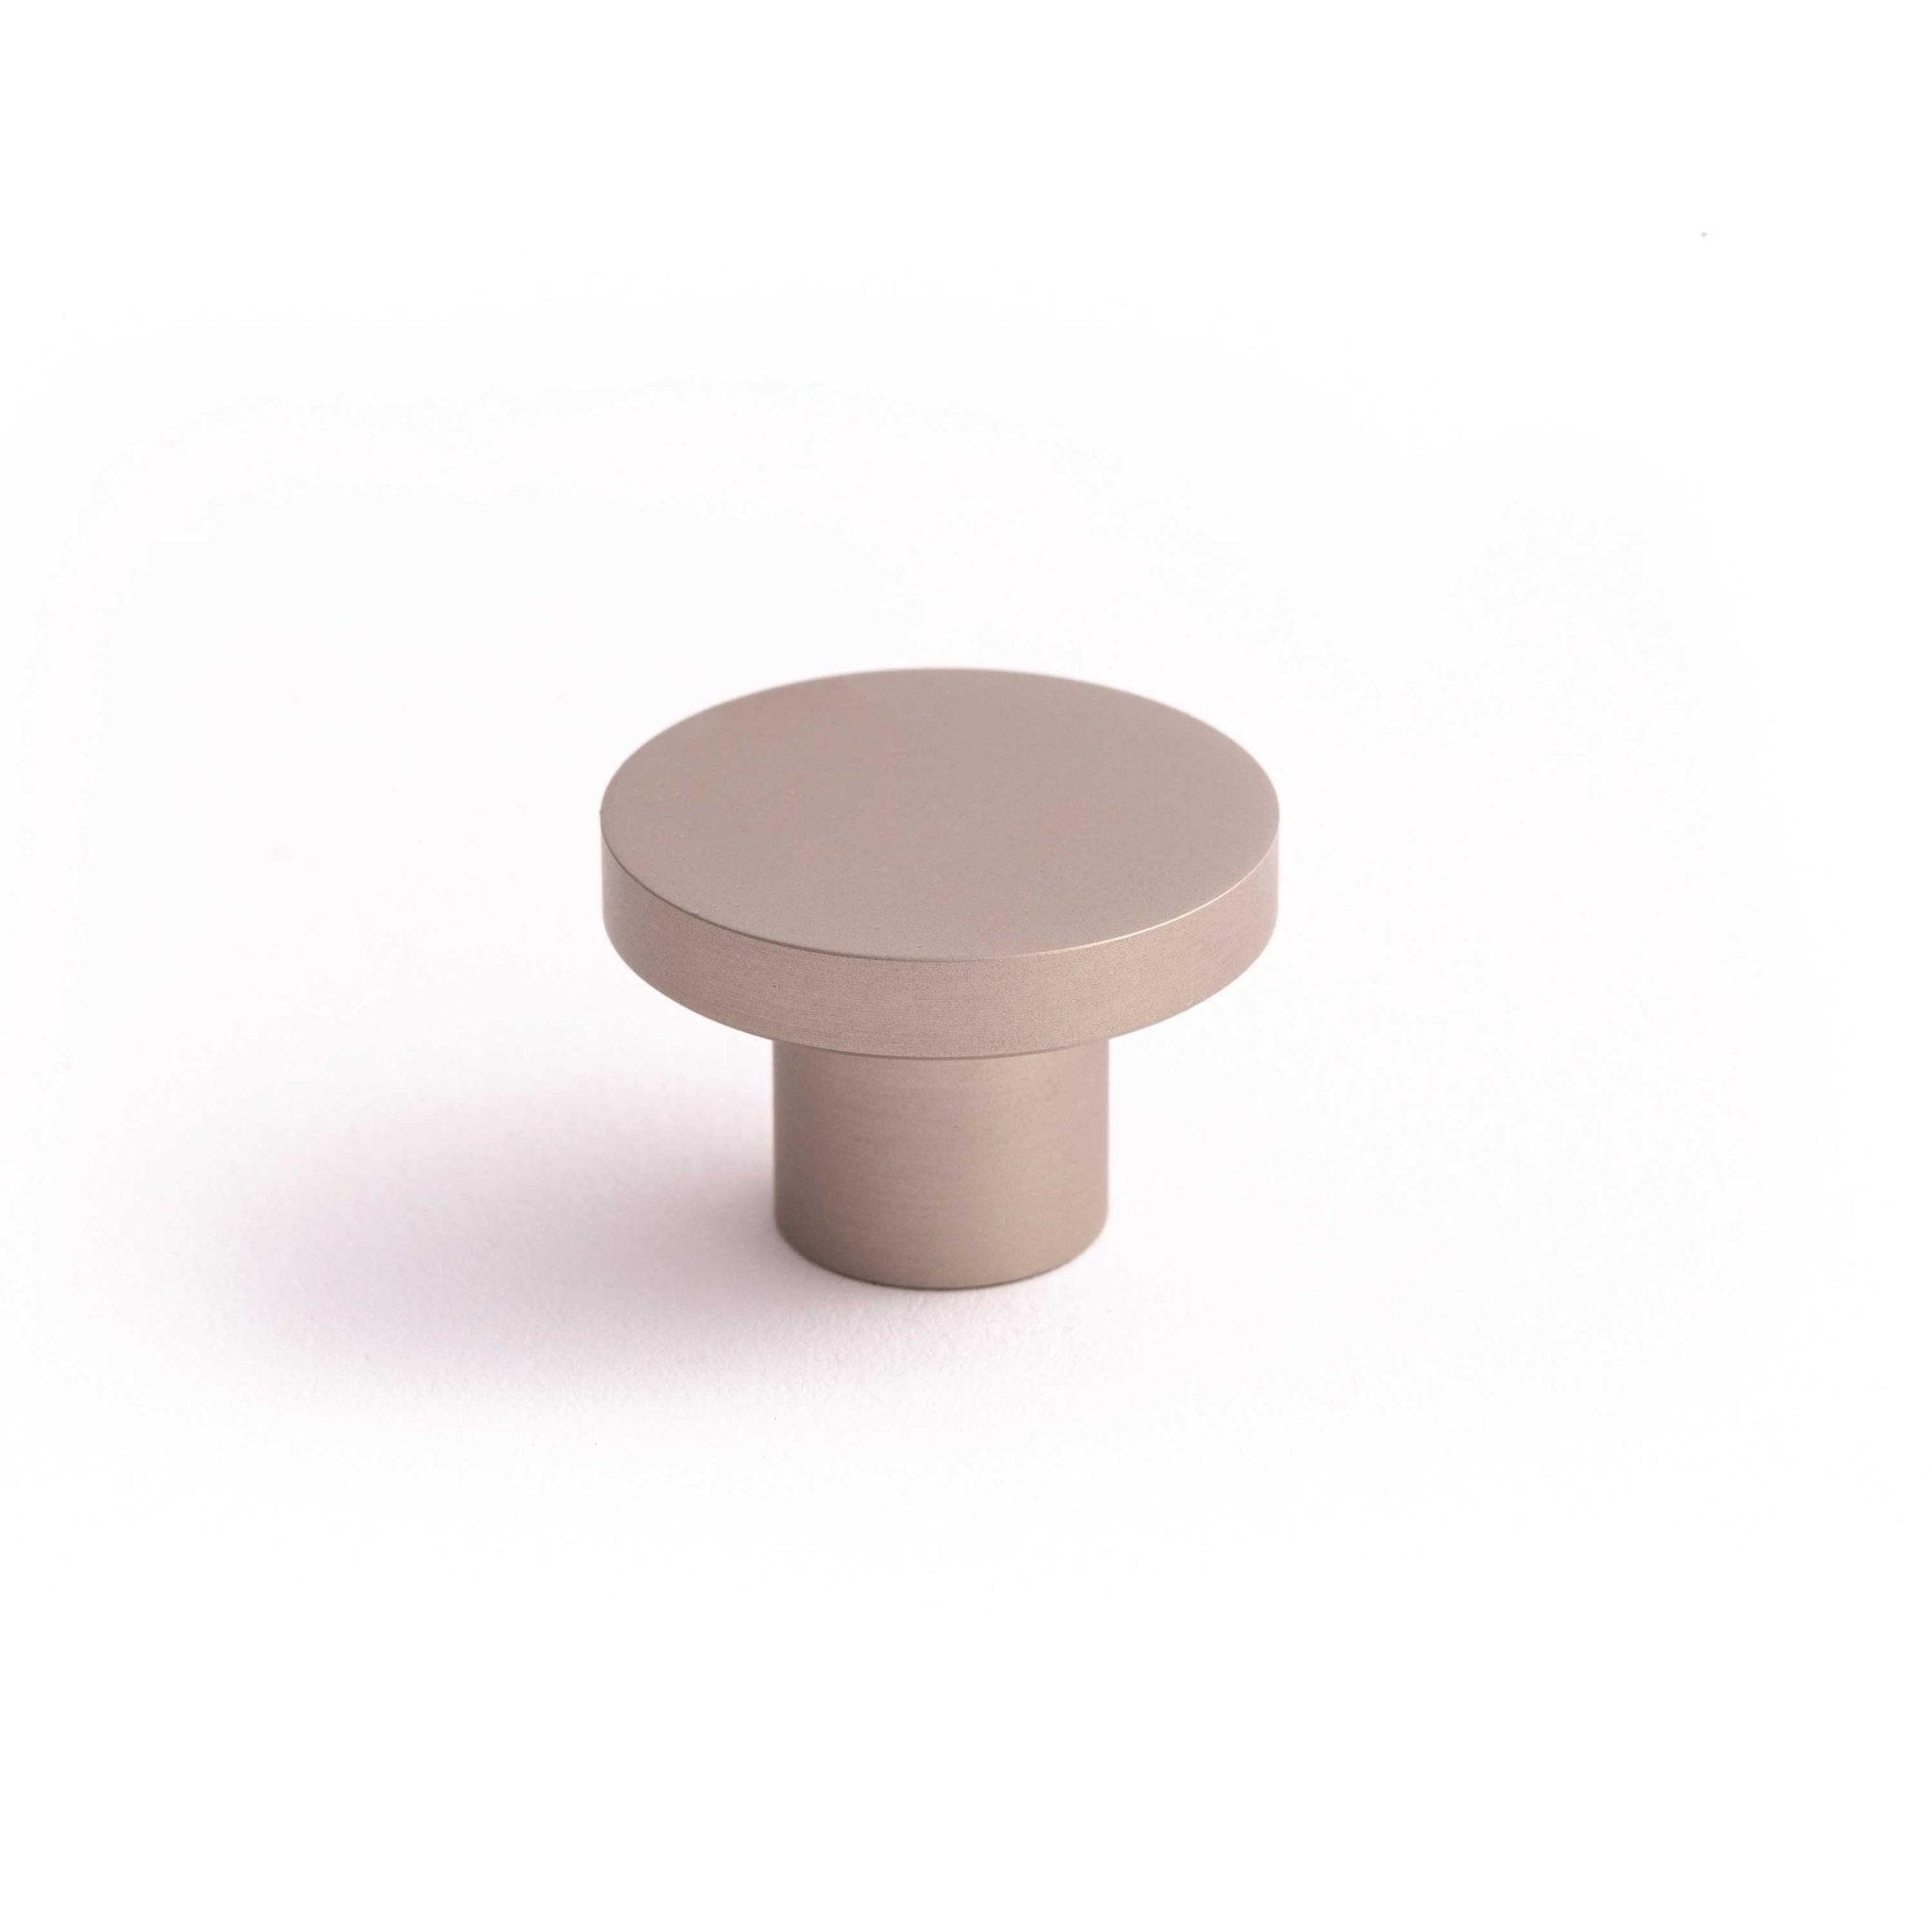 Disk 30mm Knob-Industrial Nickel--The Hairpin Leg Co.